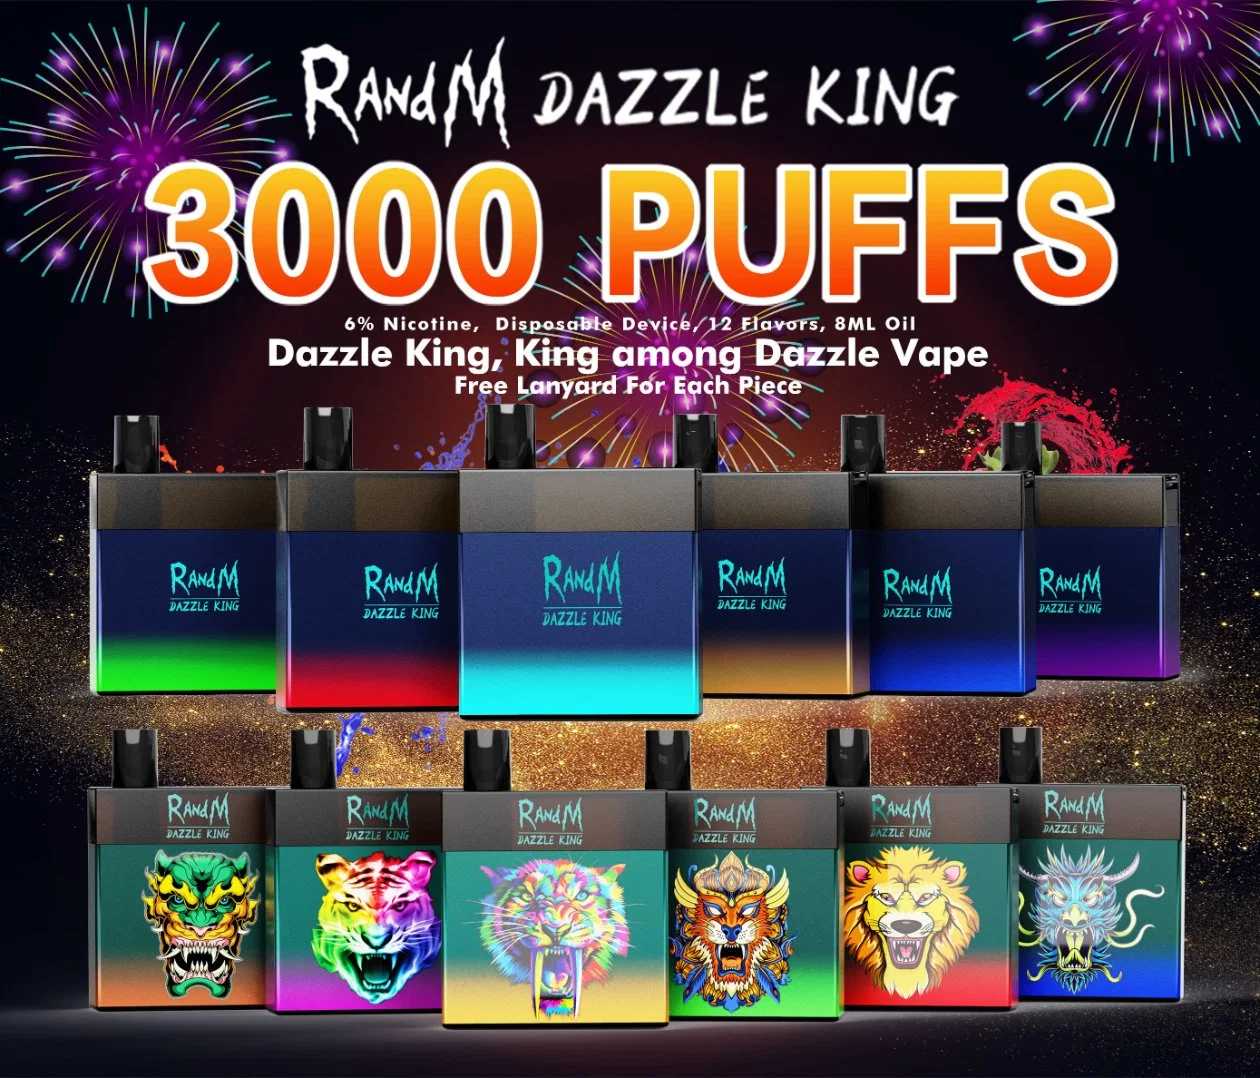 The Fast-Moving Randm Dazzle King (Plain version) 3000puffs Fast-Selling Vape Pen, Rechargeable / Shine light Light Flashing, Consumers Are Very Chasing